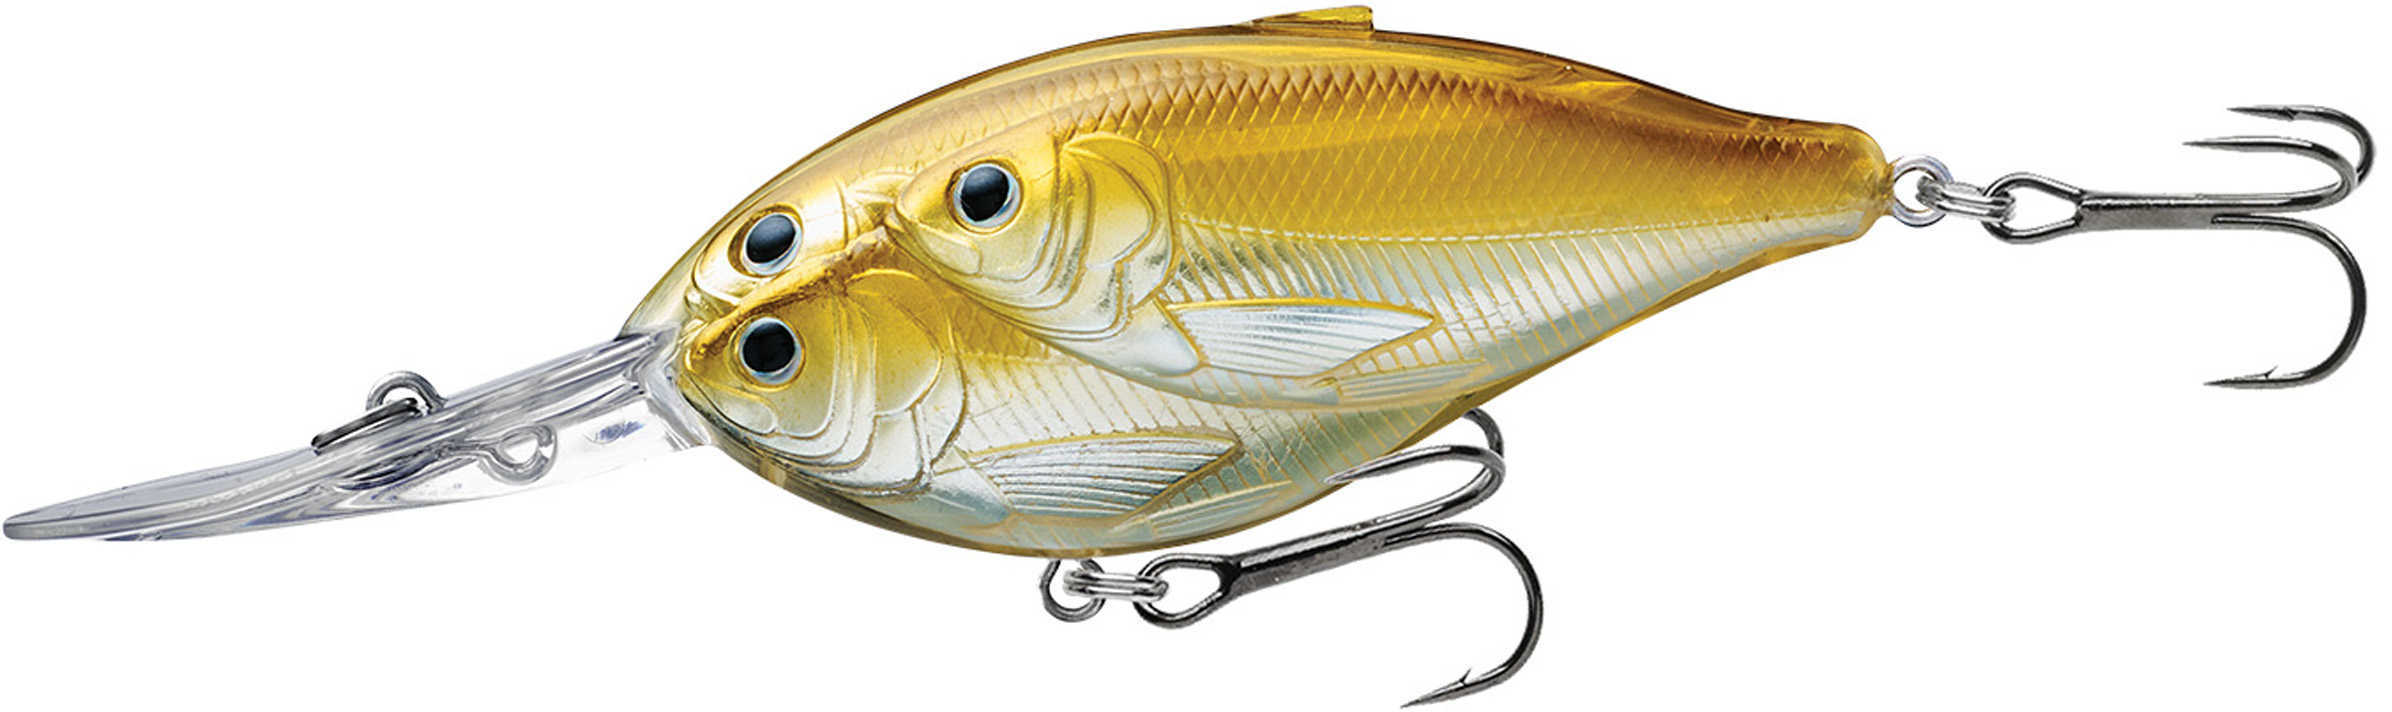 LIVETARGET Lures / Koppers Fishing and Tackle Corp Threadfin Shad Crankbait 3 1/2" Number Hook Size 20 Depth Metallic Pearl/Olive